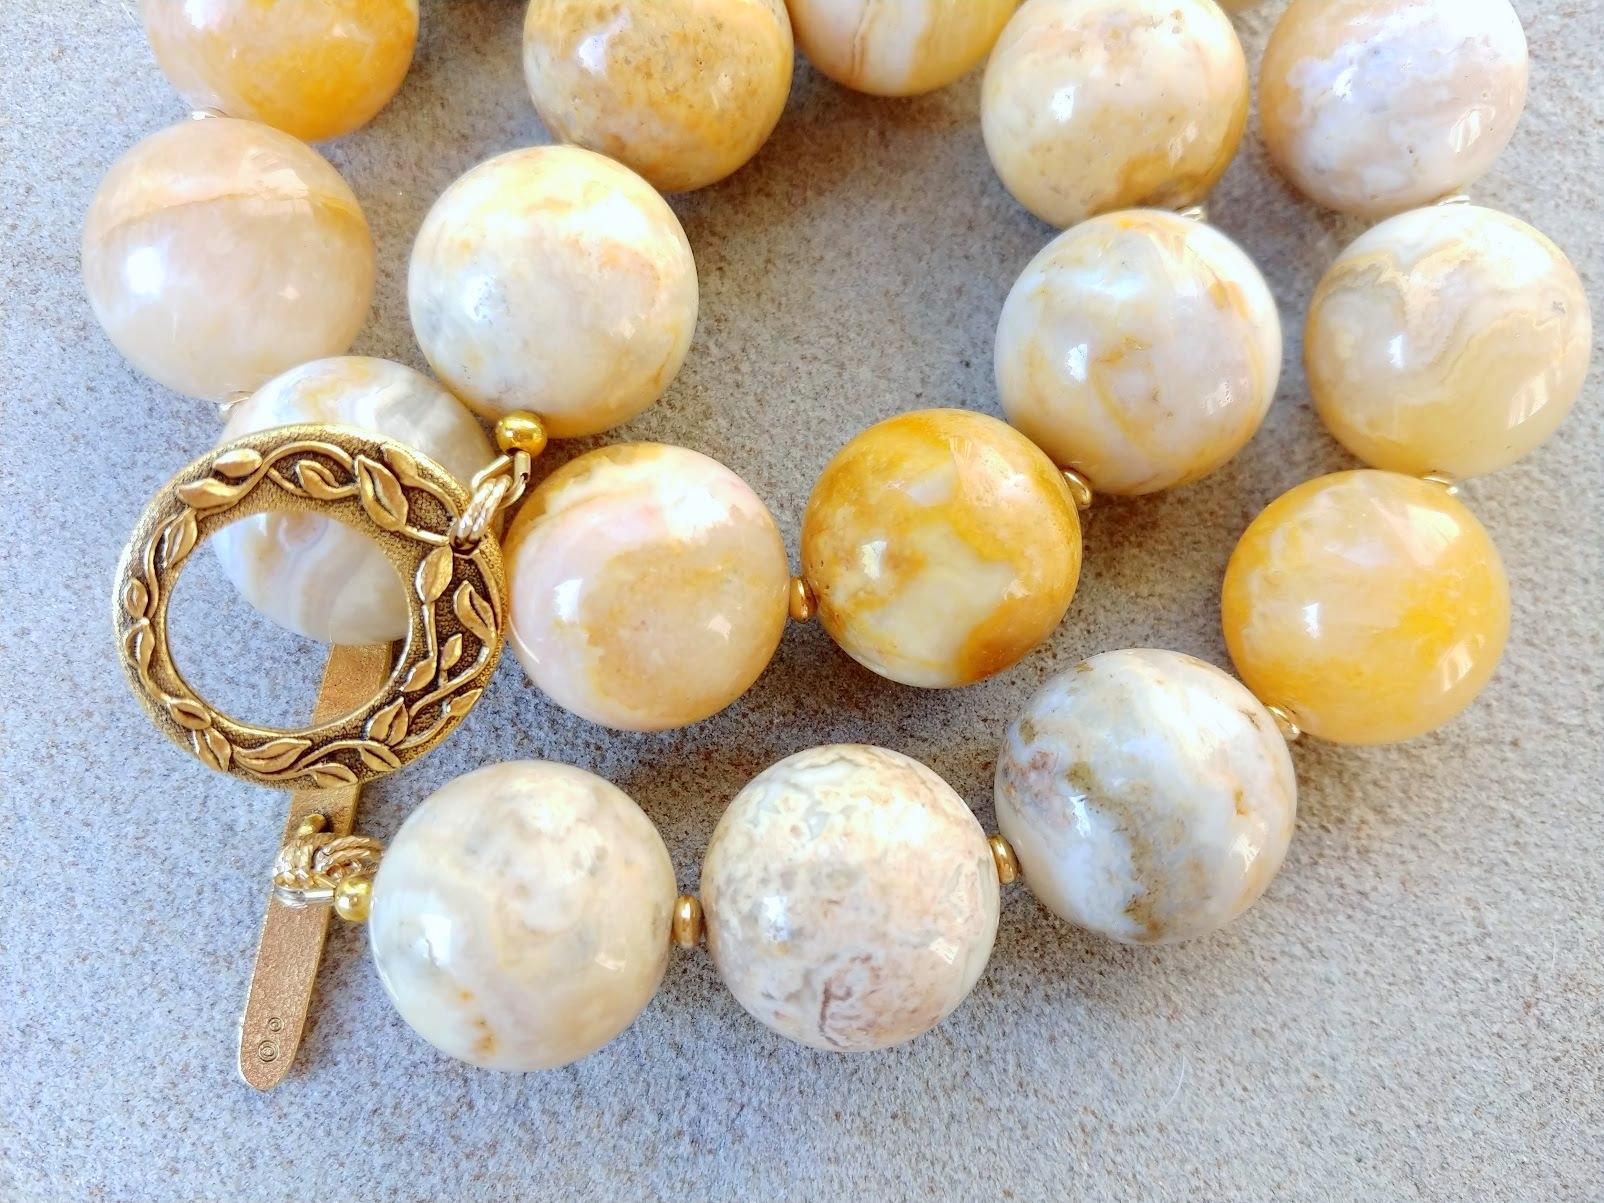 The length of the necklace is 18.5 inches (47 cm).
The size of the smooth round beads is 20 mm.

Yellow or Crazy Lace Agate (also known as Mexican Agate) is a banded chalcedony (microcrystalline quartz) infused with iron and aluminum. It is often